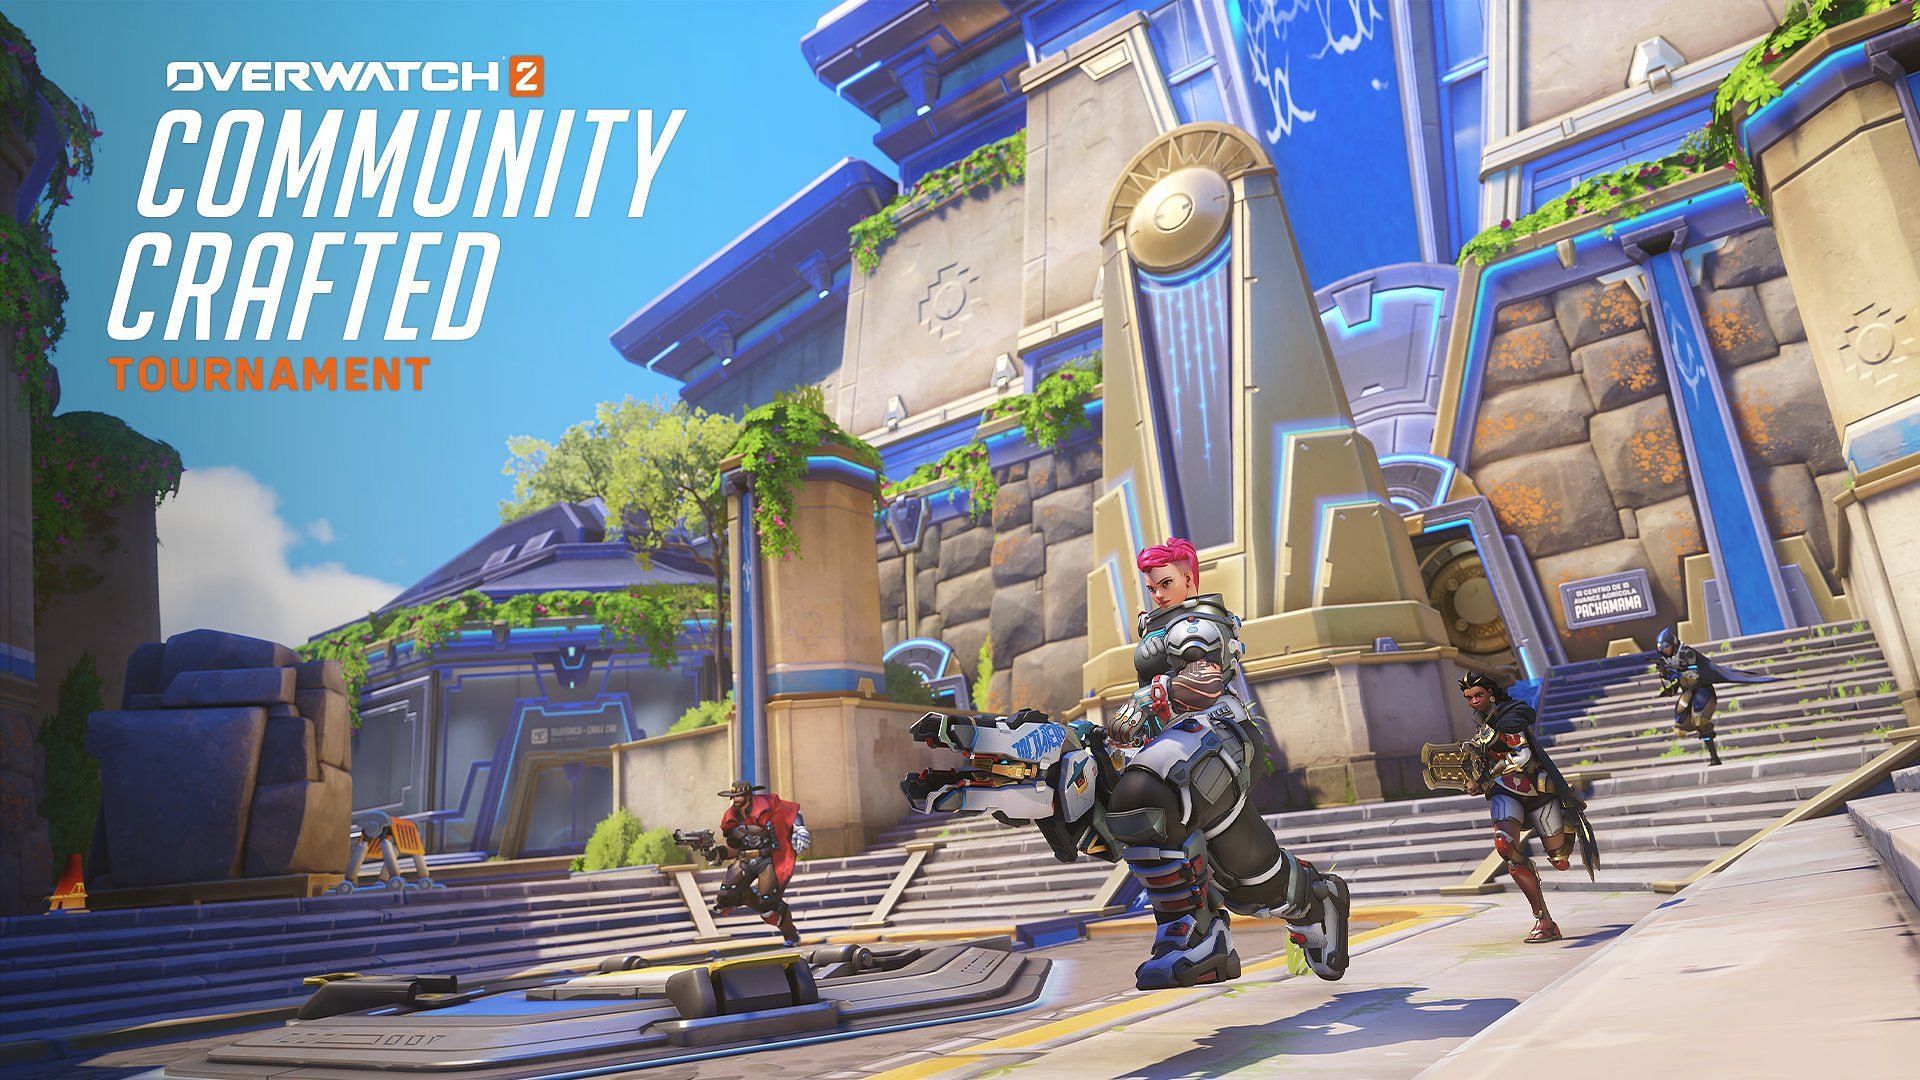 Overwatch 2 Community Crafted Tournament (Image via X/@OW_Esports)